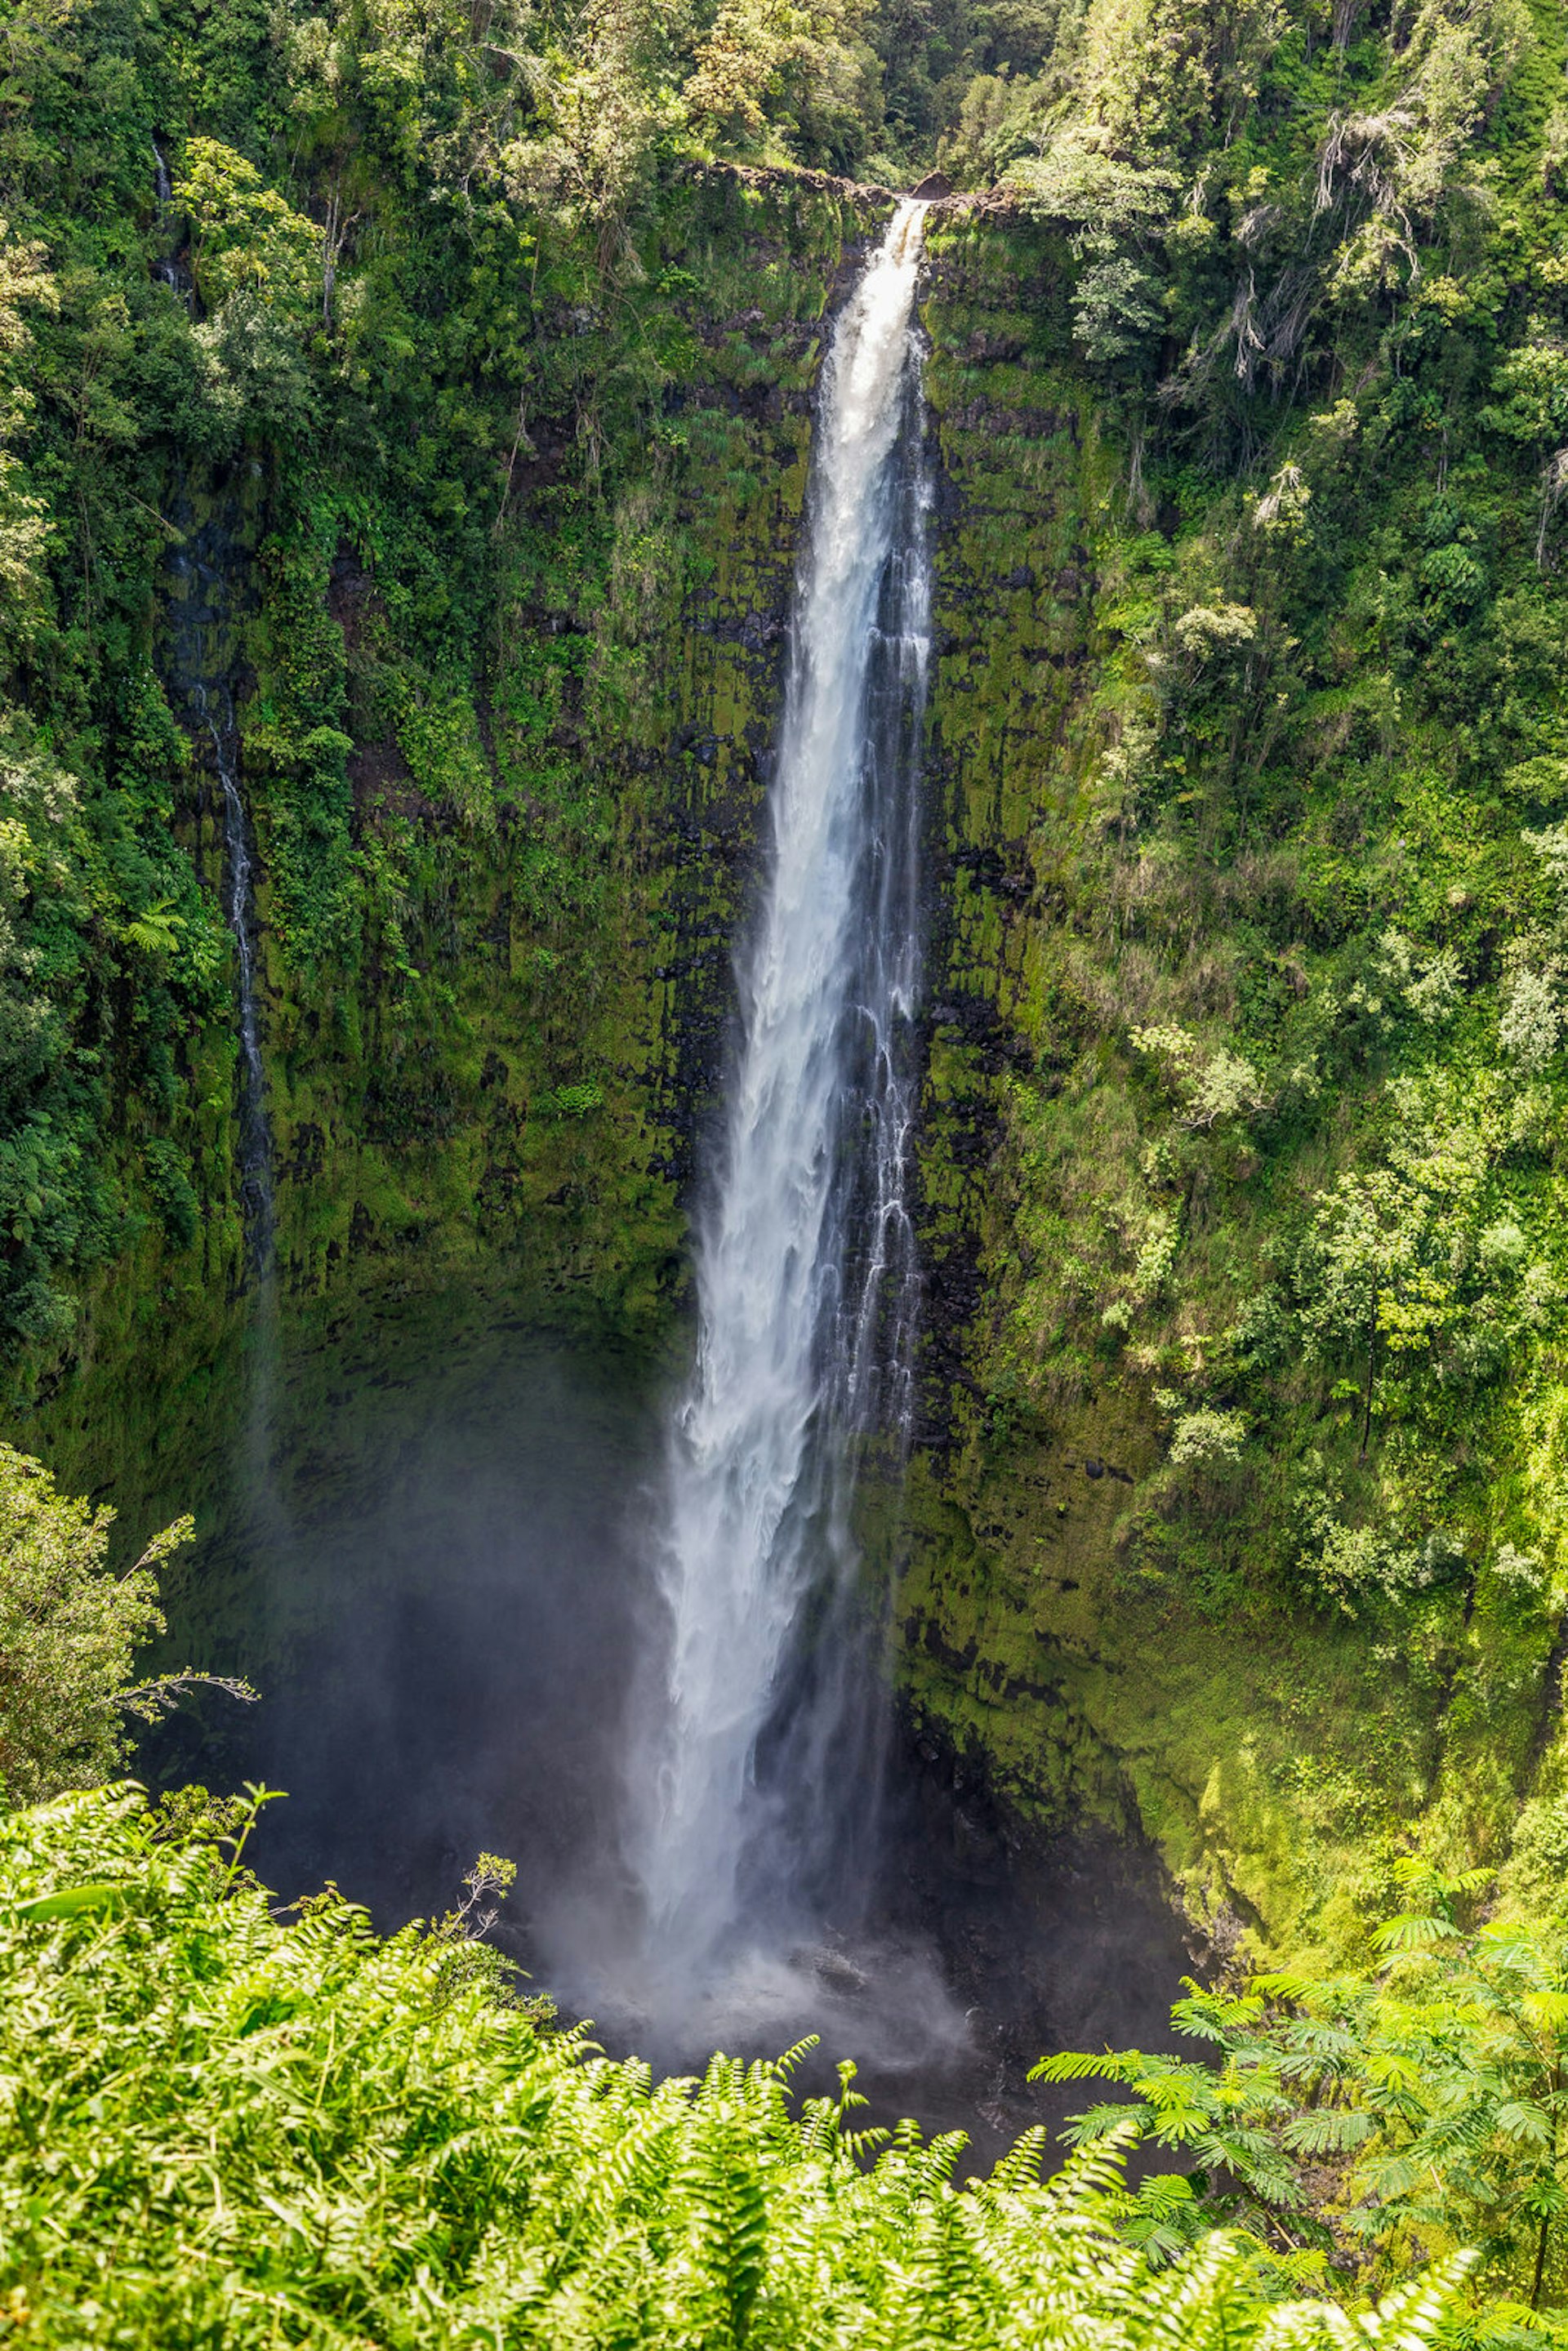 Due to consistent rainfall on the east side of the island, Akaka Falls is always surging © Alexander Howard / Lonely Planet